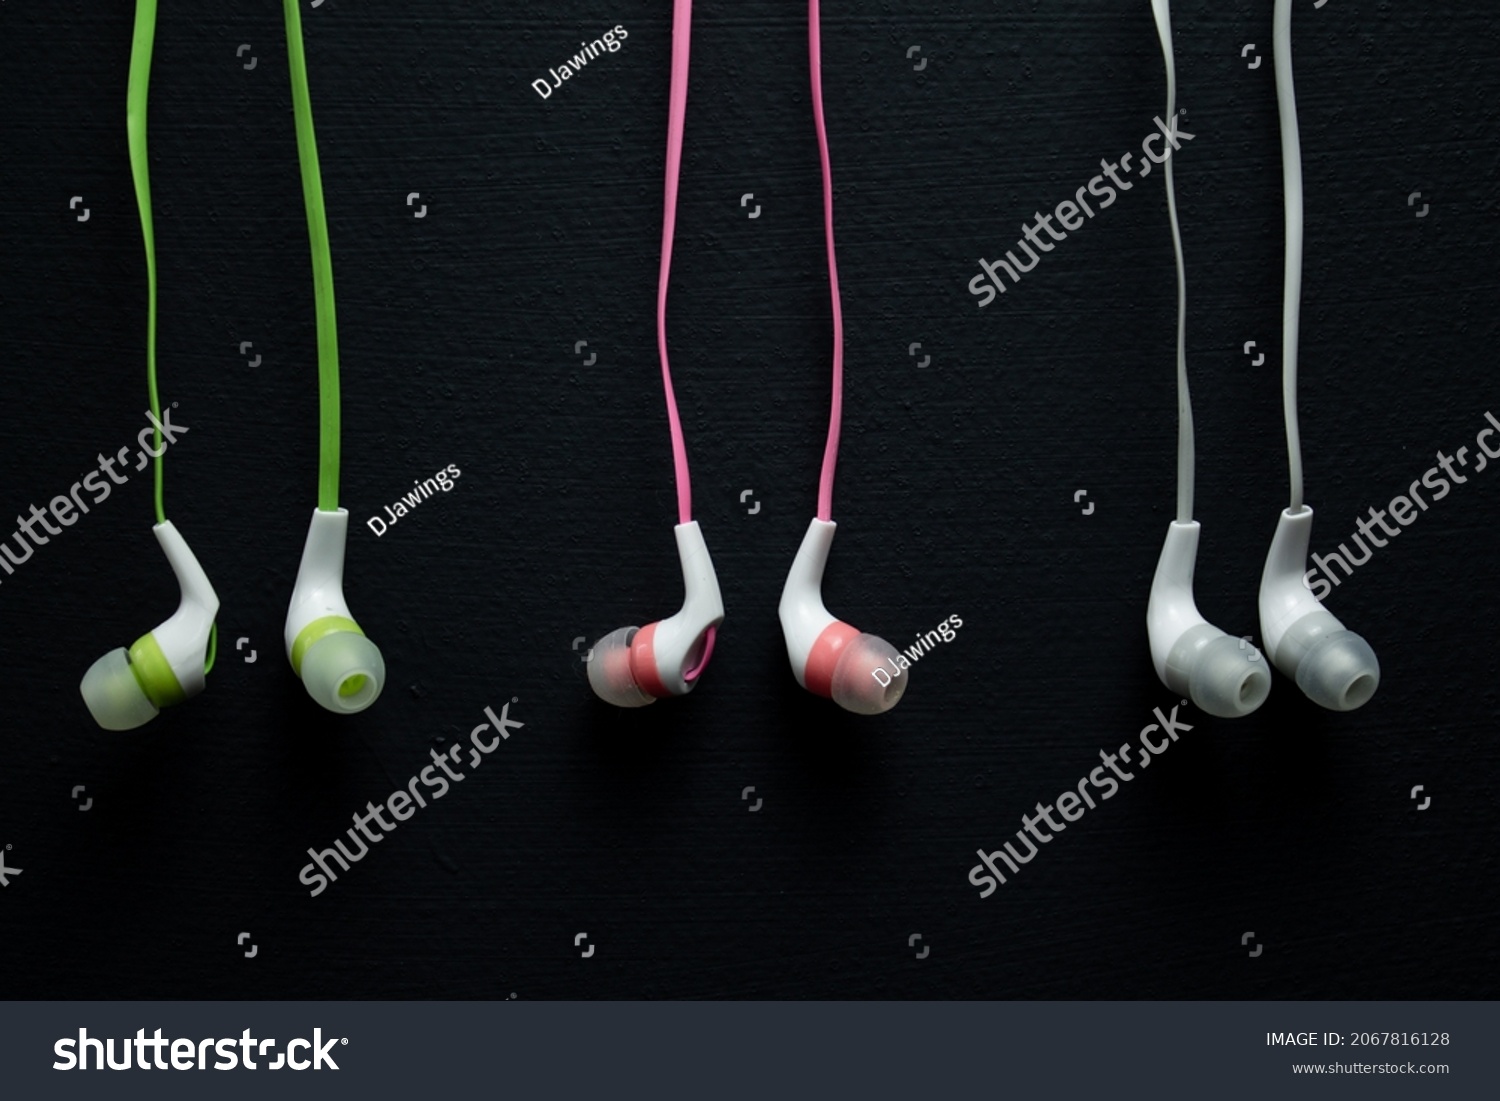 headphones, wired headphones, wire, colored wires, black background, pink wire, gray wire, green wire, accessories. #2067816128